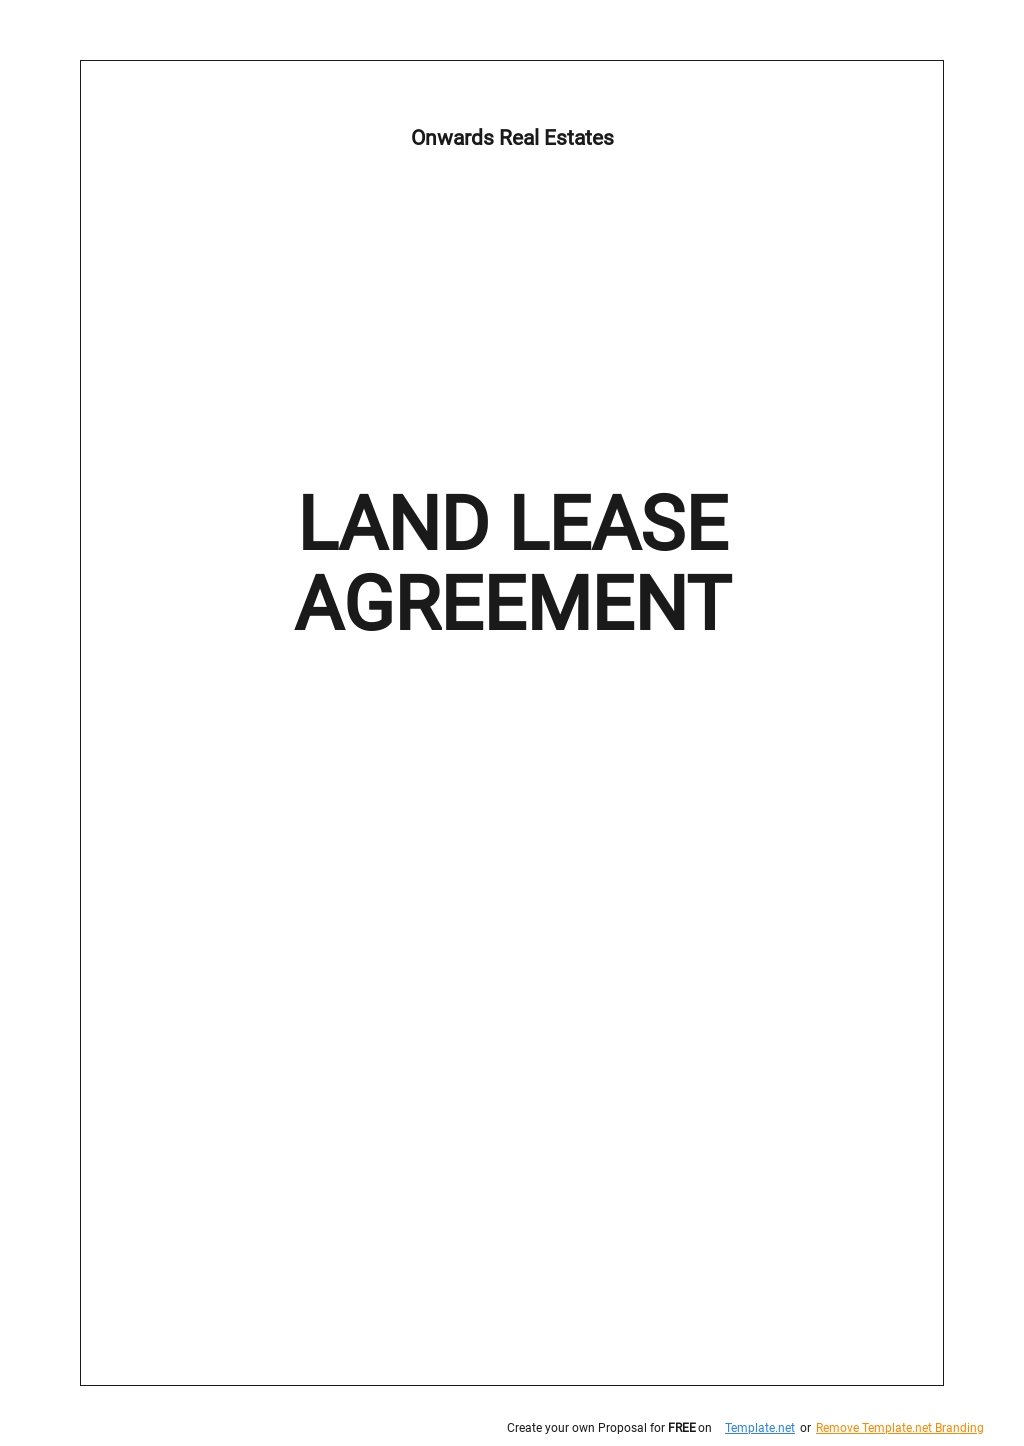 land-lease-agreements-in-word-templates-designs-docs-free